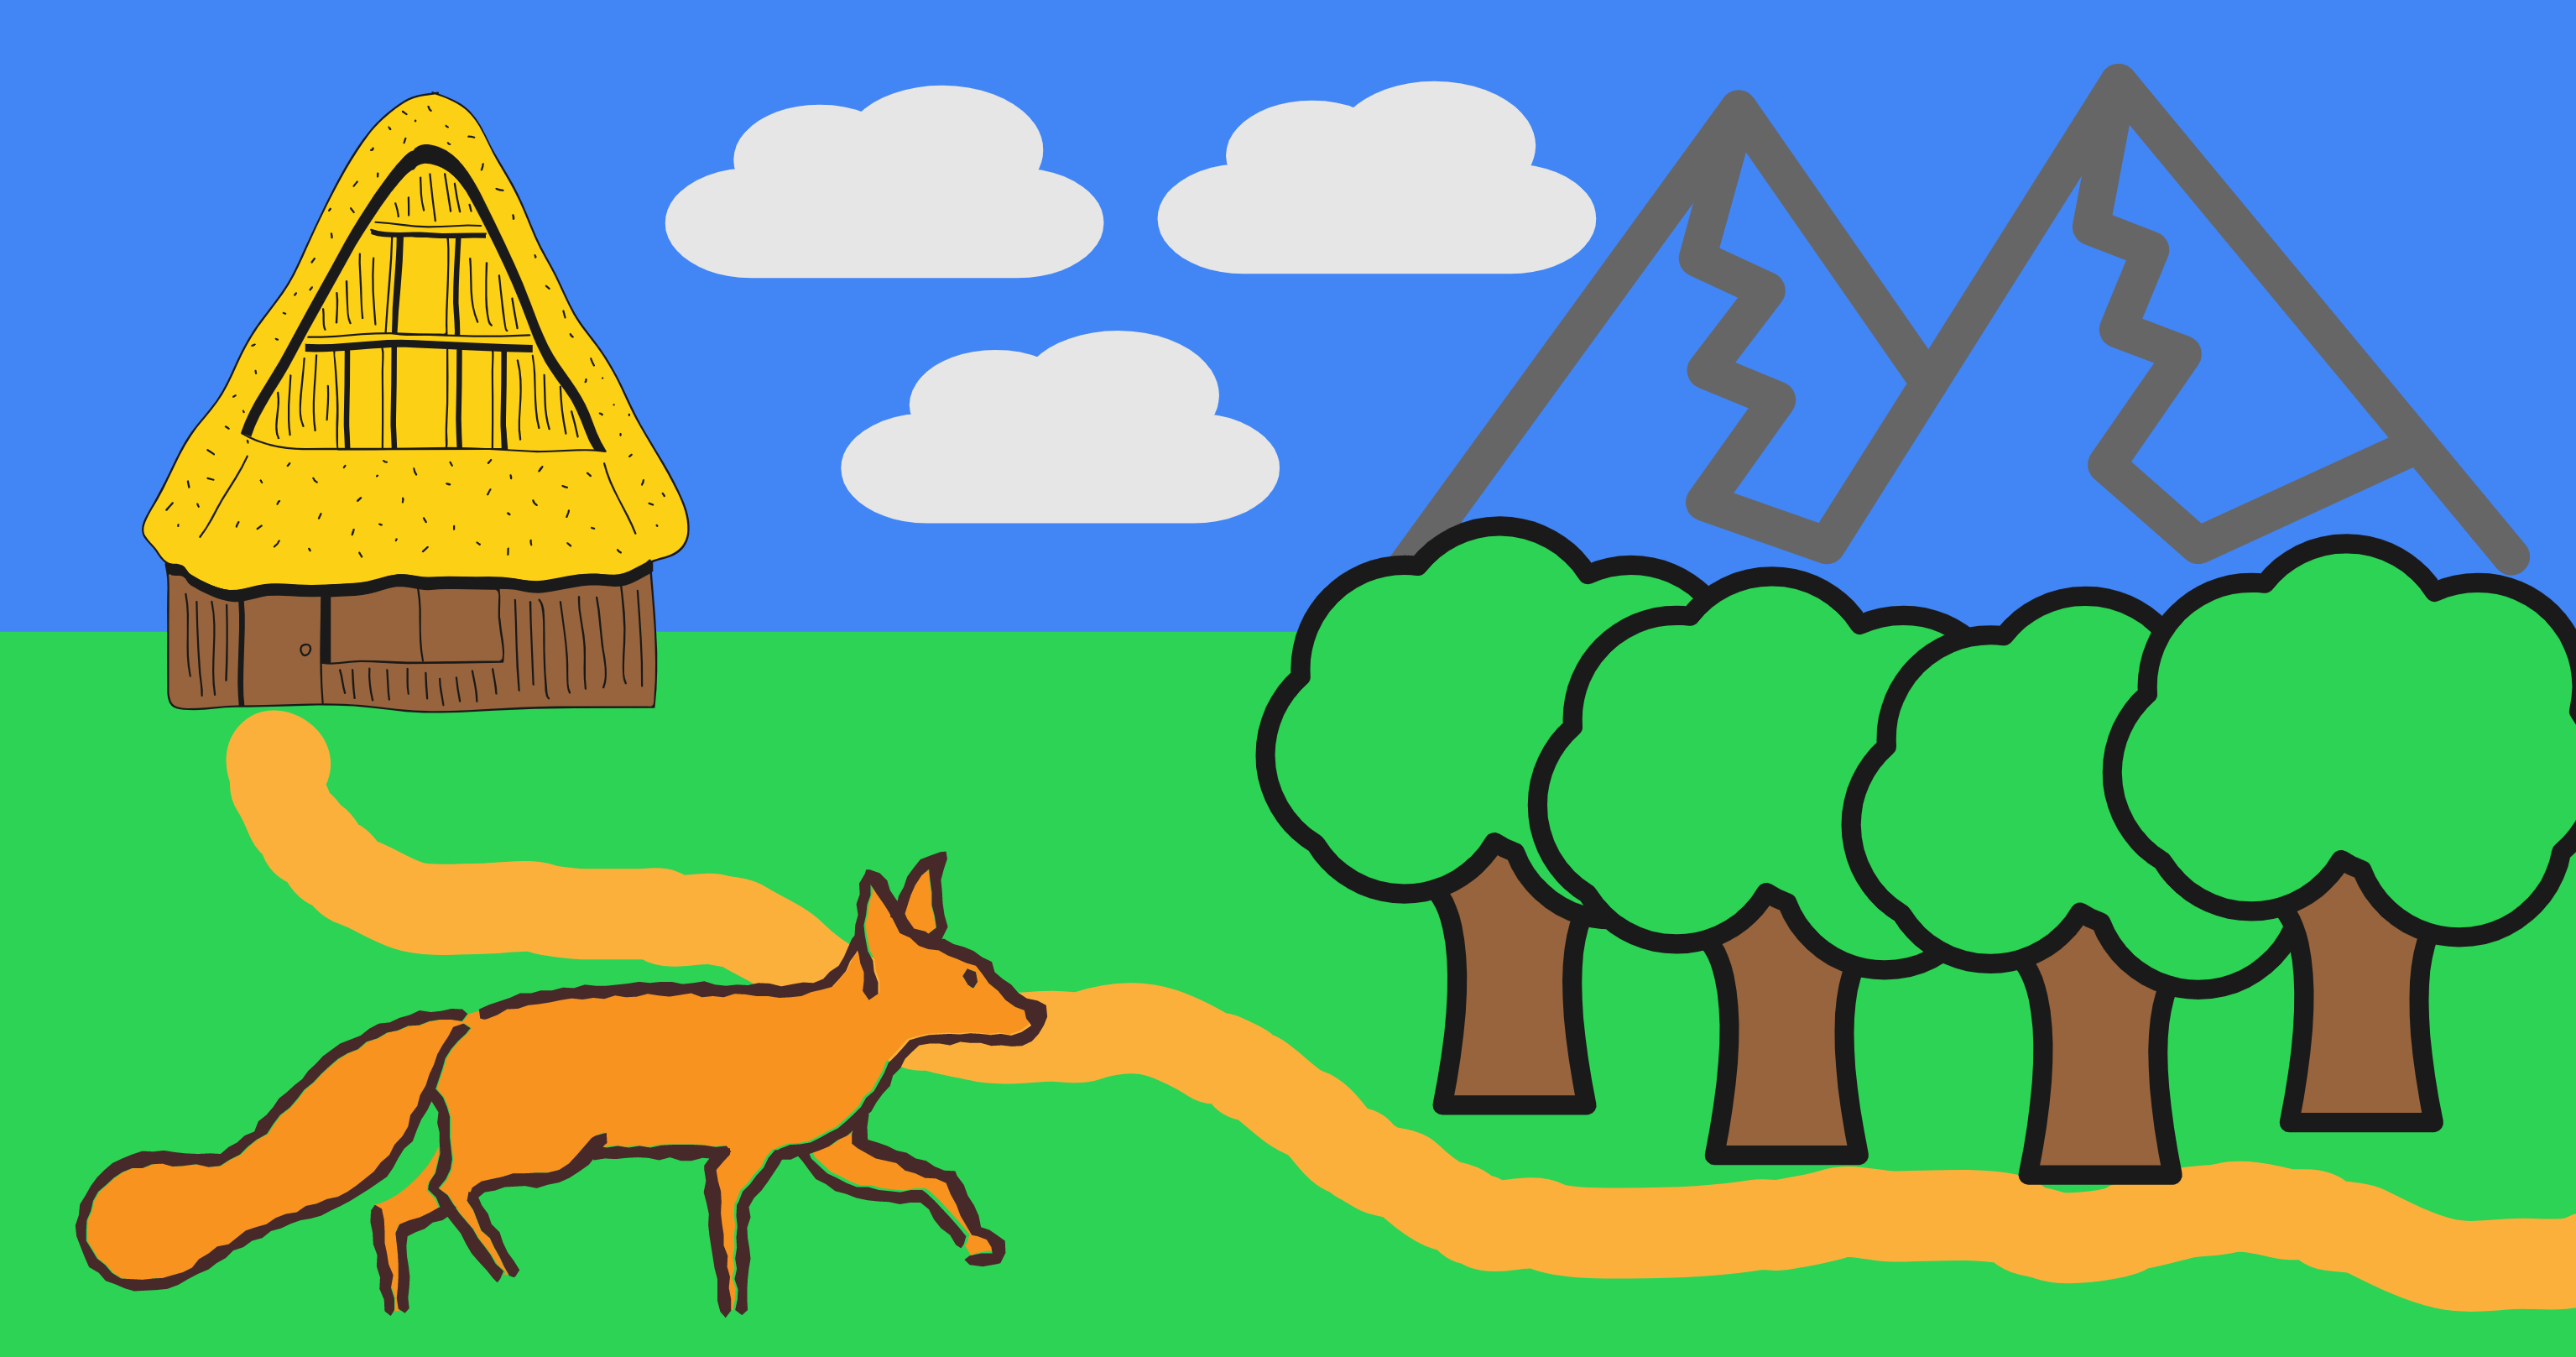 Artwork - My drawing with the help of autodraw